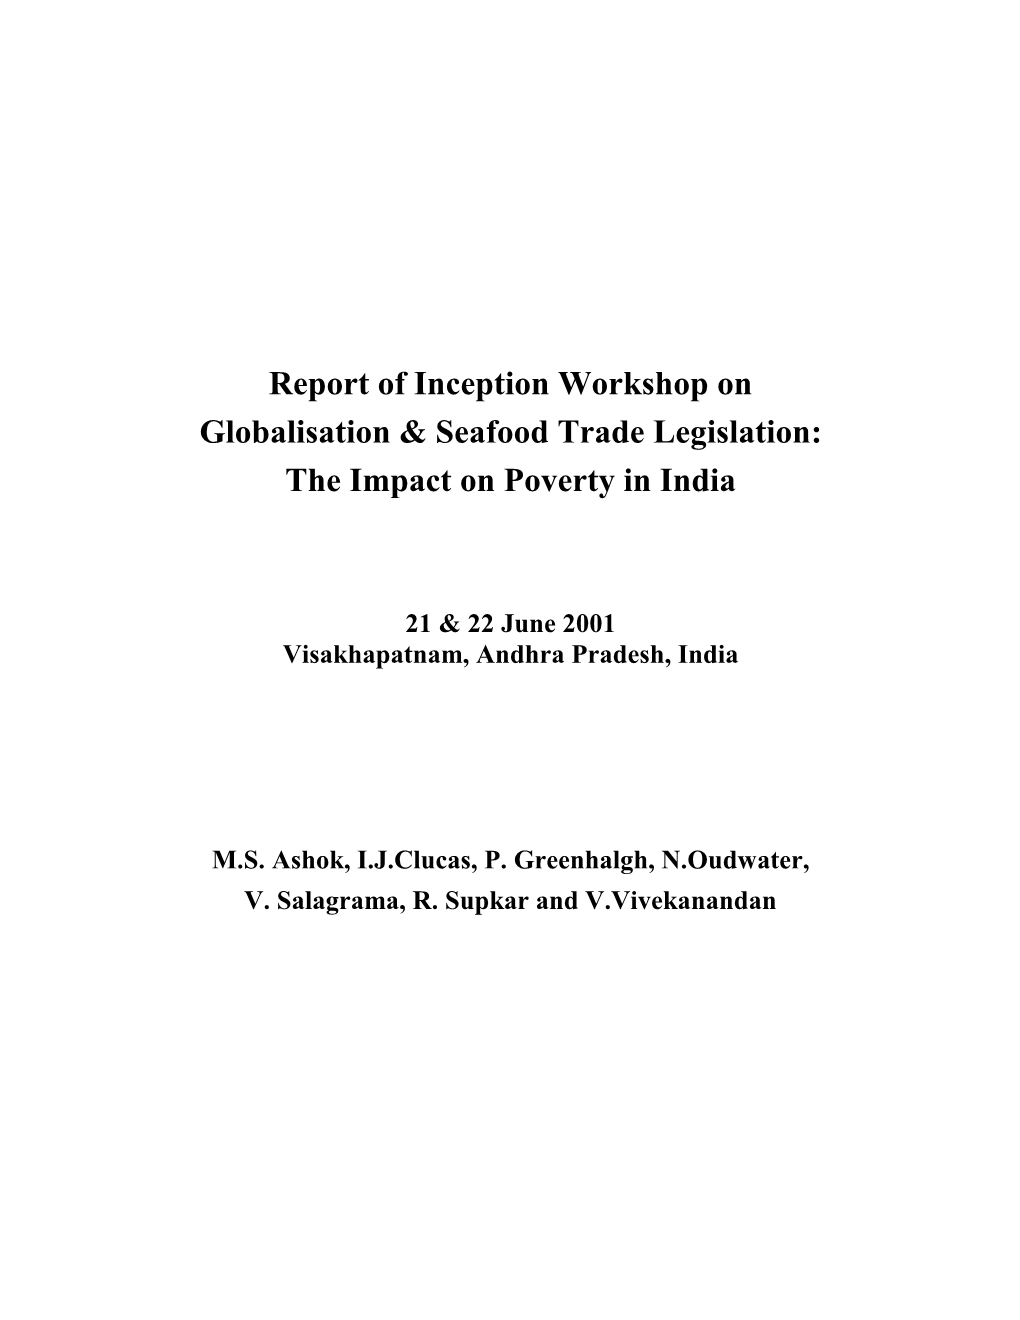 Report of Inception Workshop on Globalisation & Seafood Trade